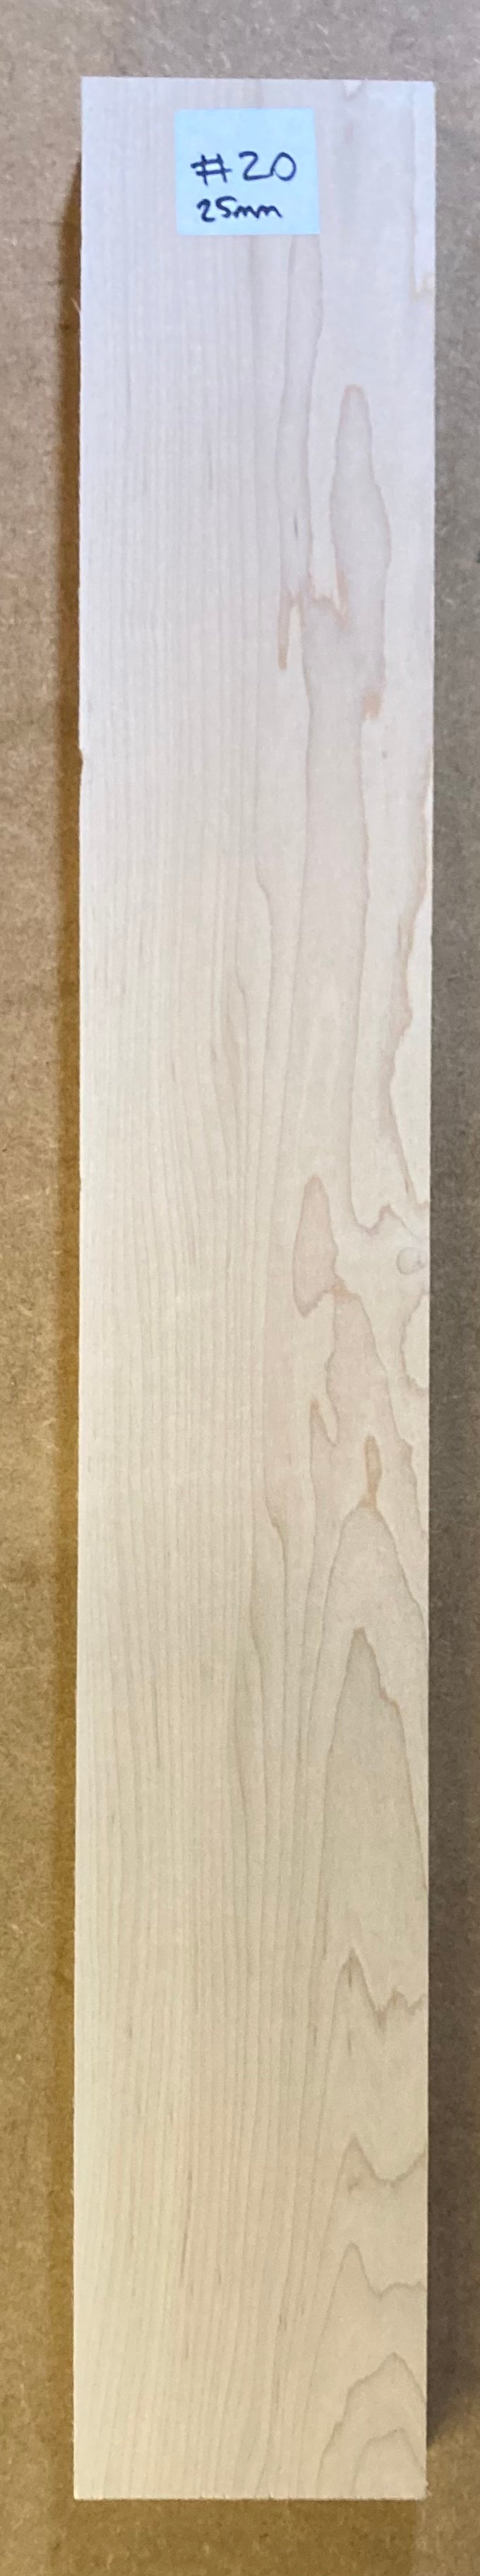 Electric Neck Blank - Maple #20